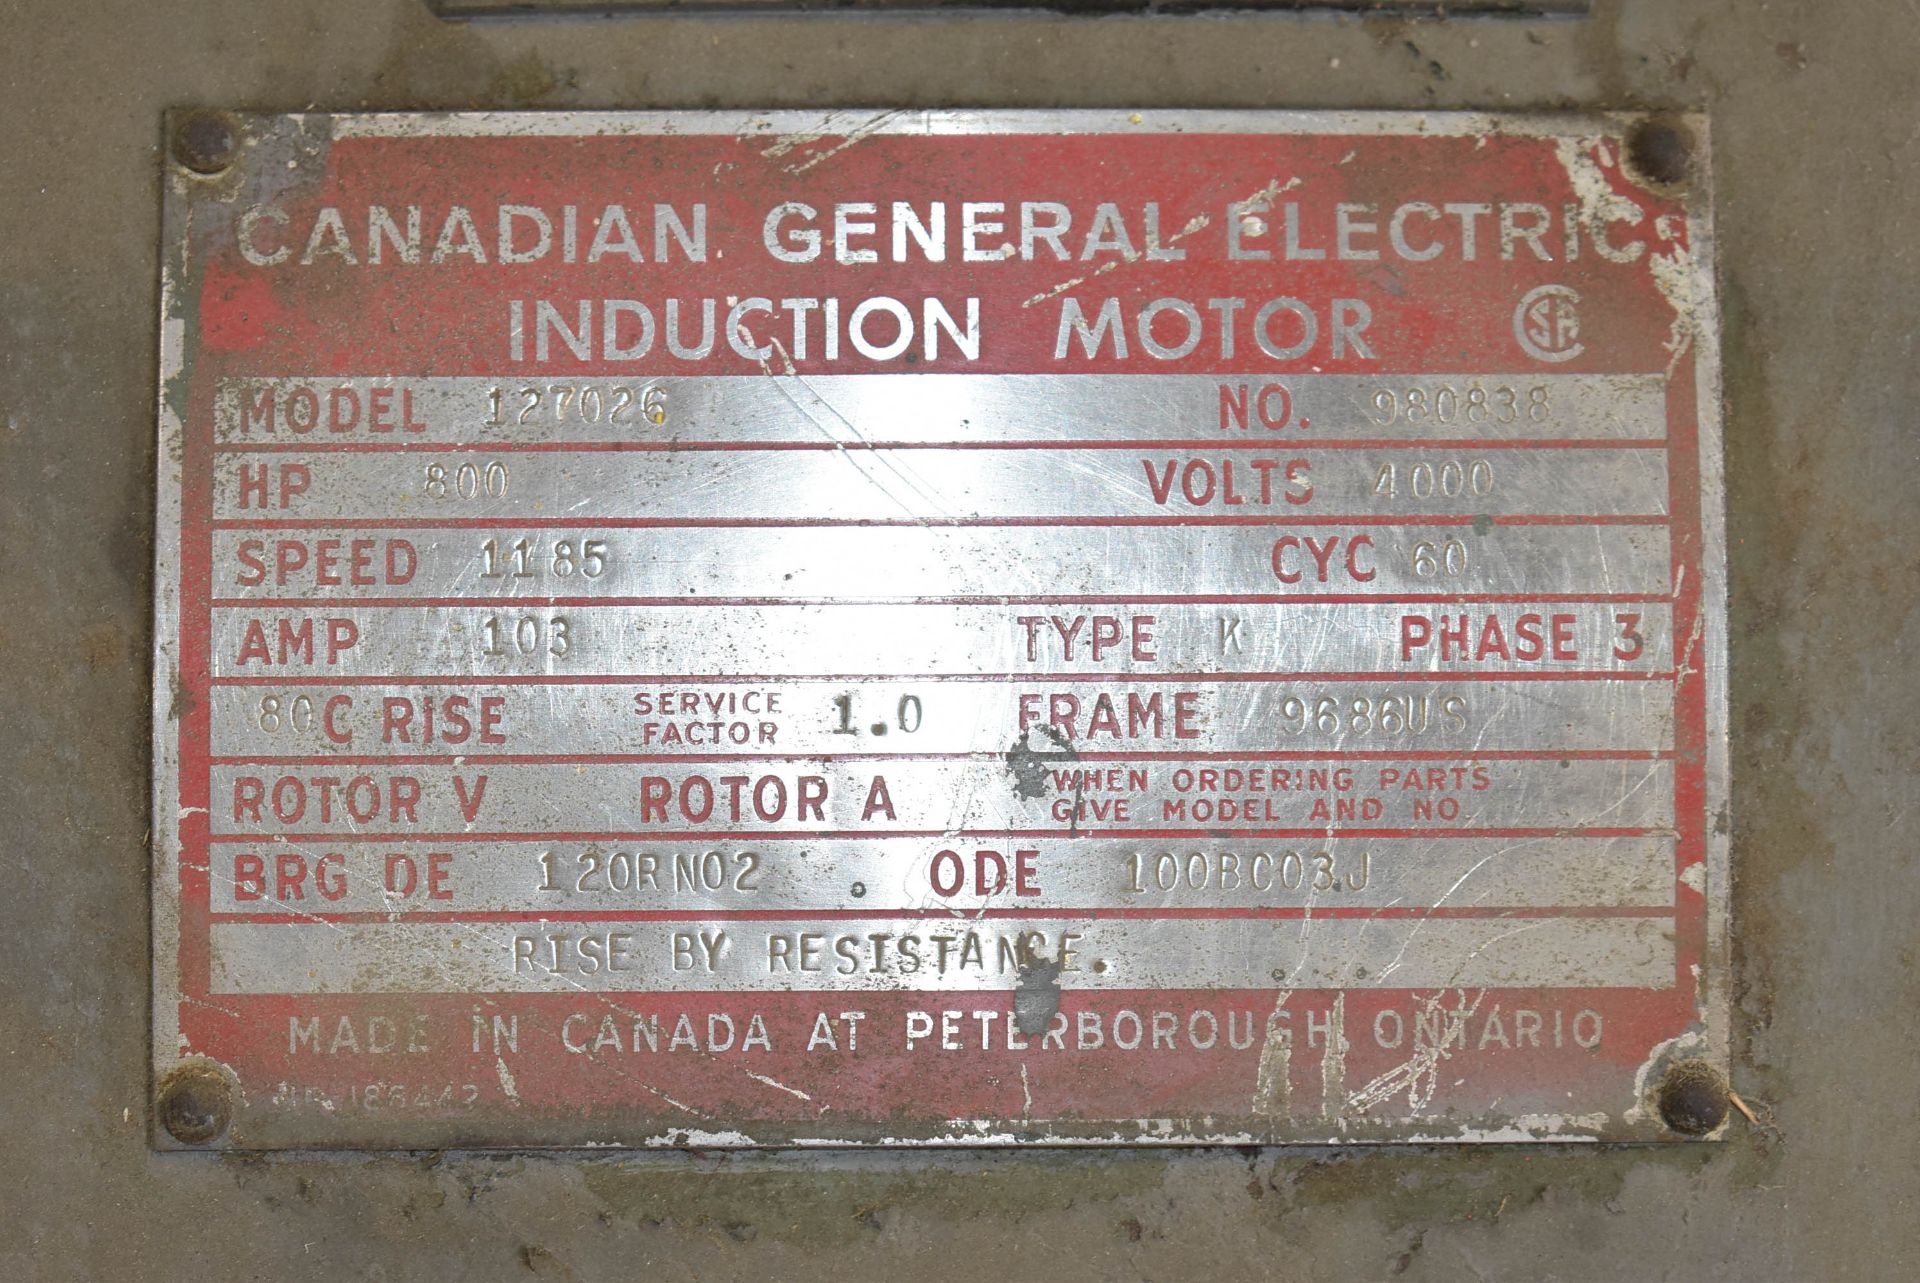 CANADIAN GENERAL ELECTRIC 127026 800 HP INDUCTION MOTOR, 4000V/3PH/60HZ, S/N 980838 (CMD-014-22S) - Image 2 of 6